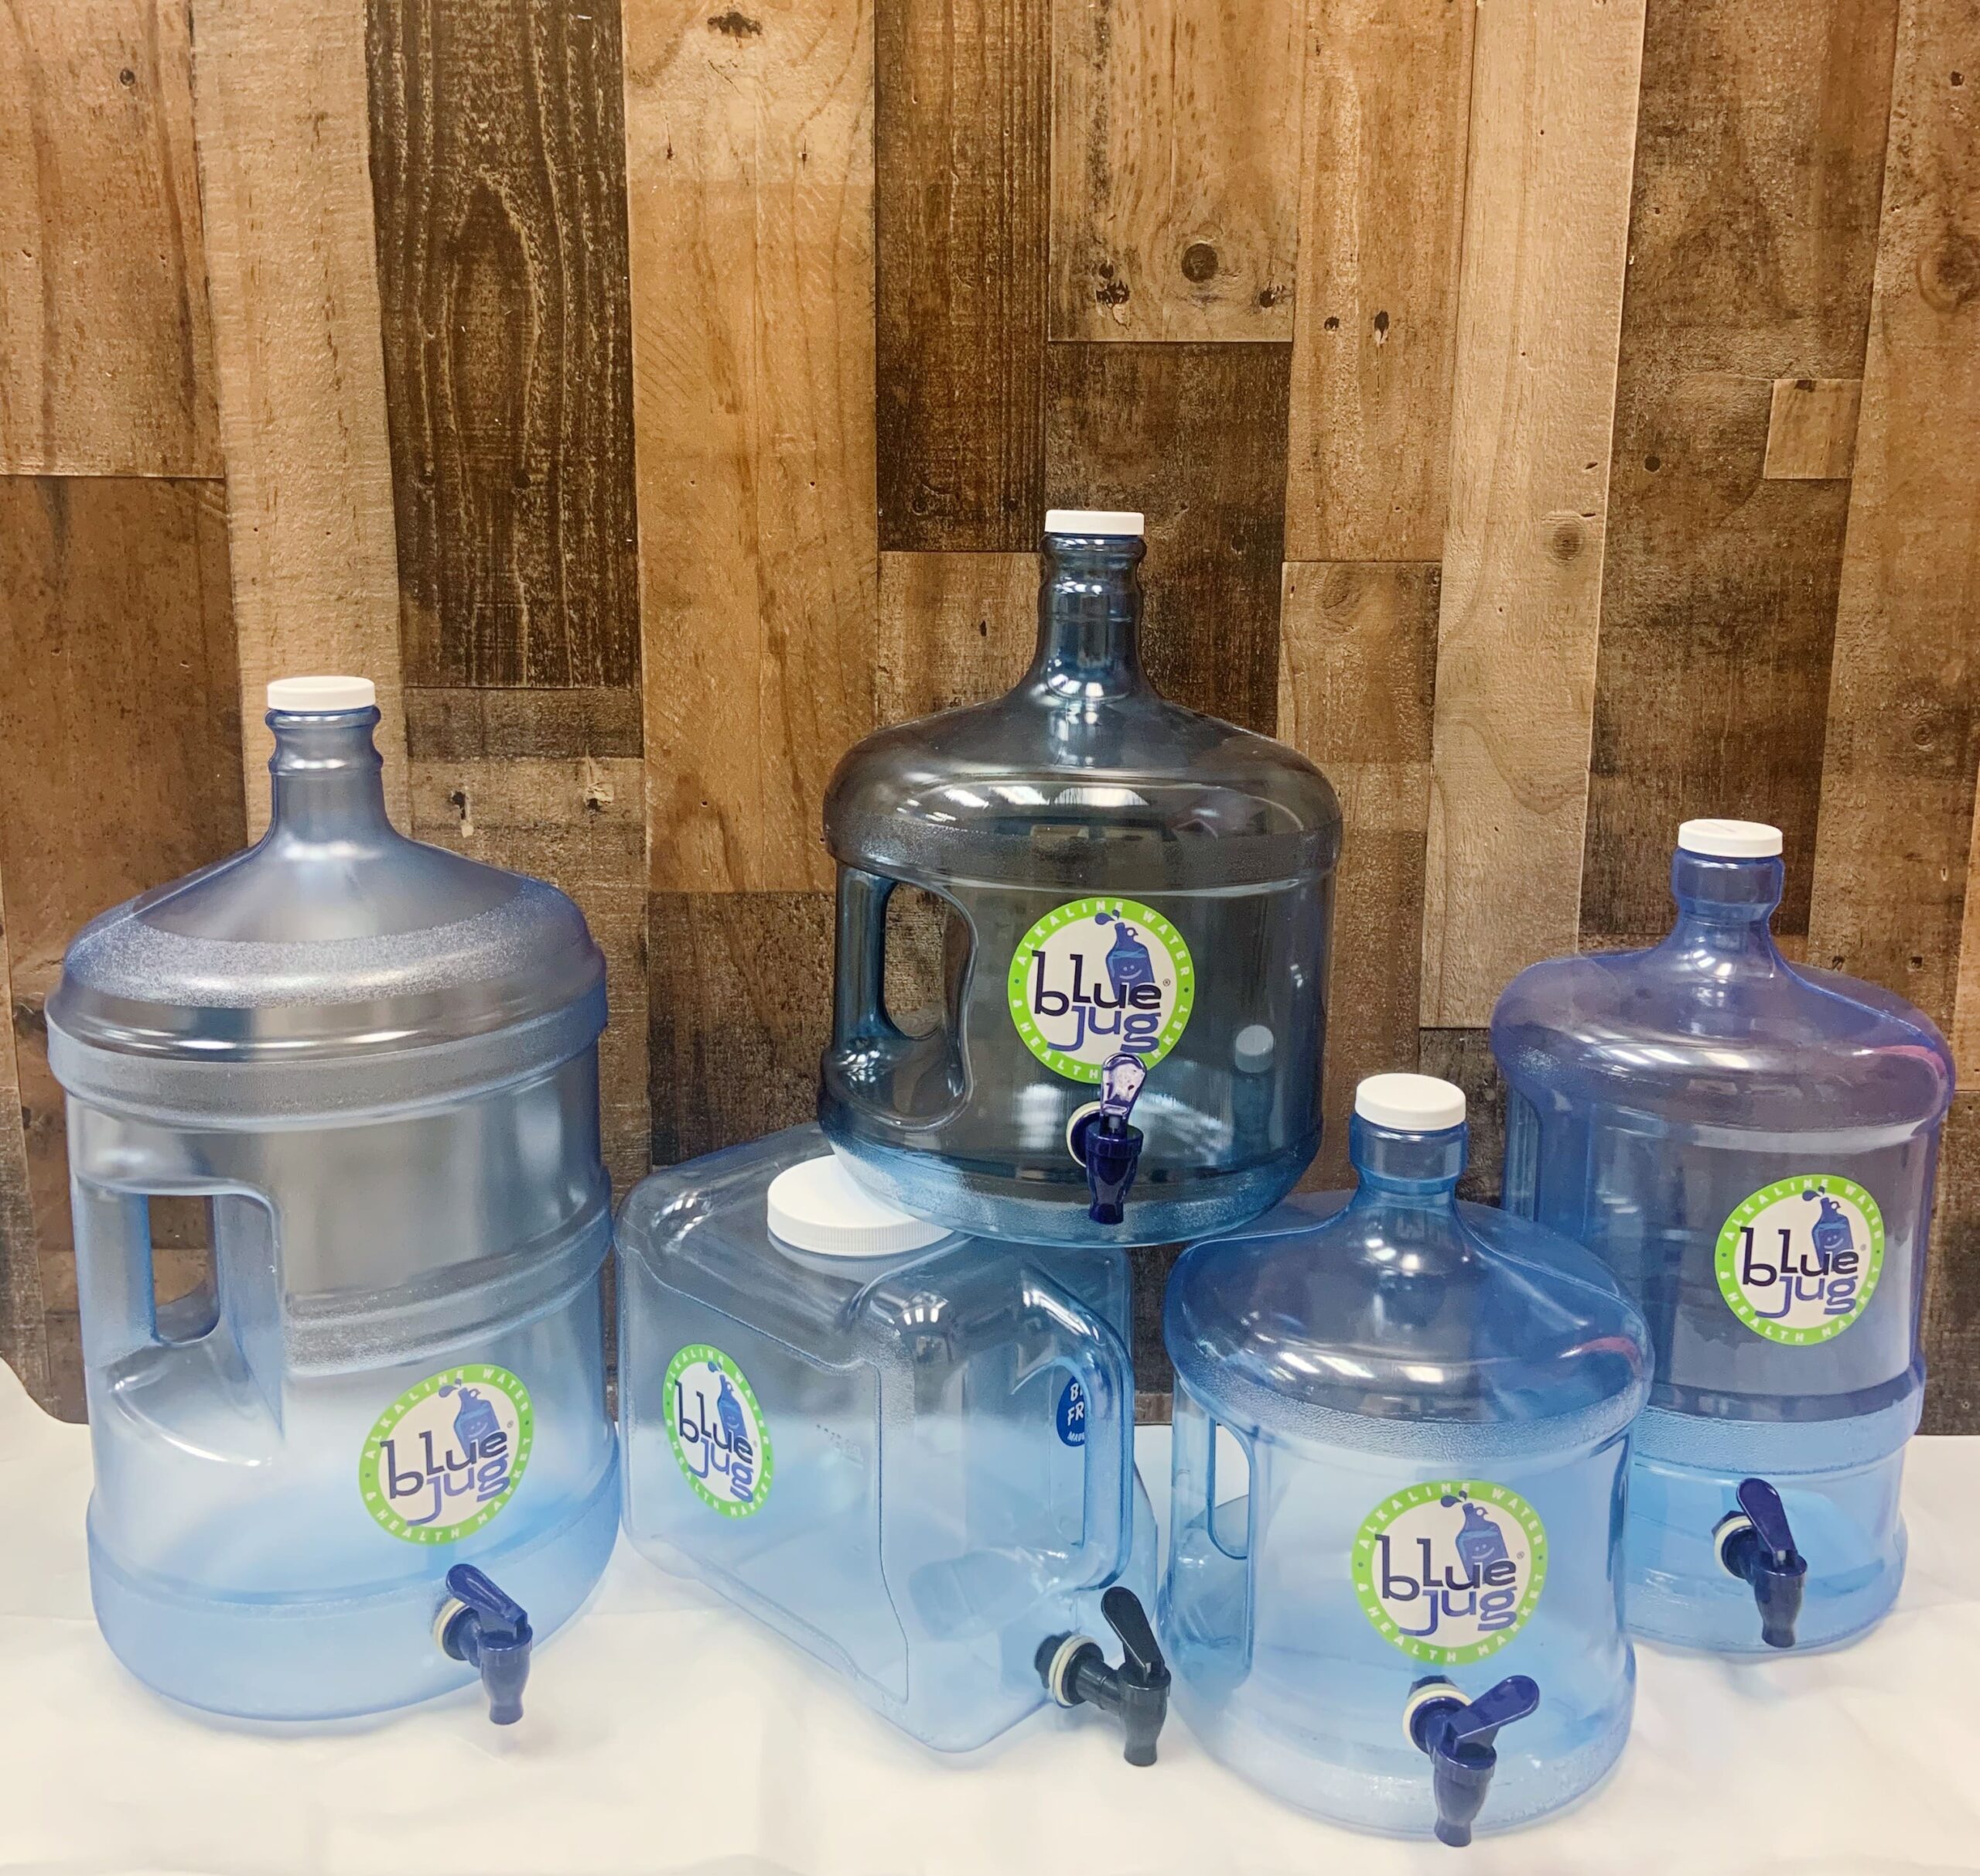 A collection of diverse drinking water filters adorned with the recognizable Blur Jug logo